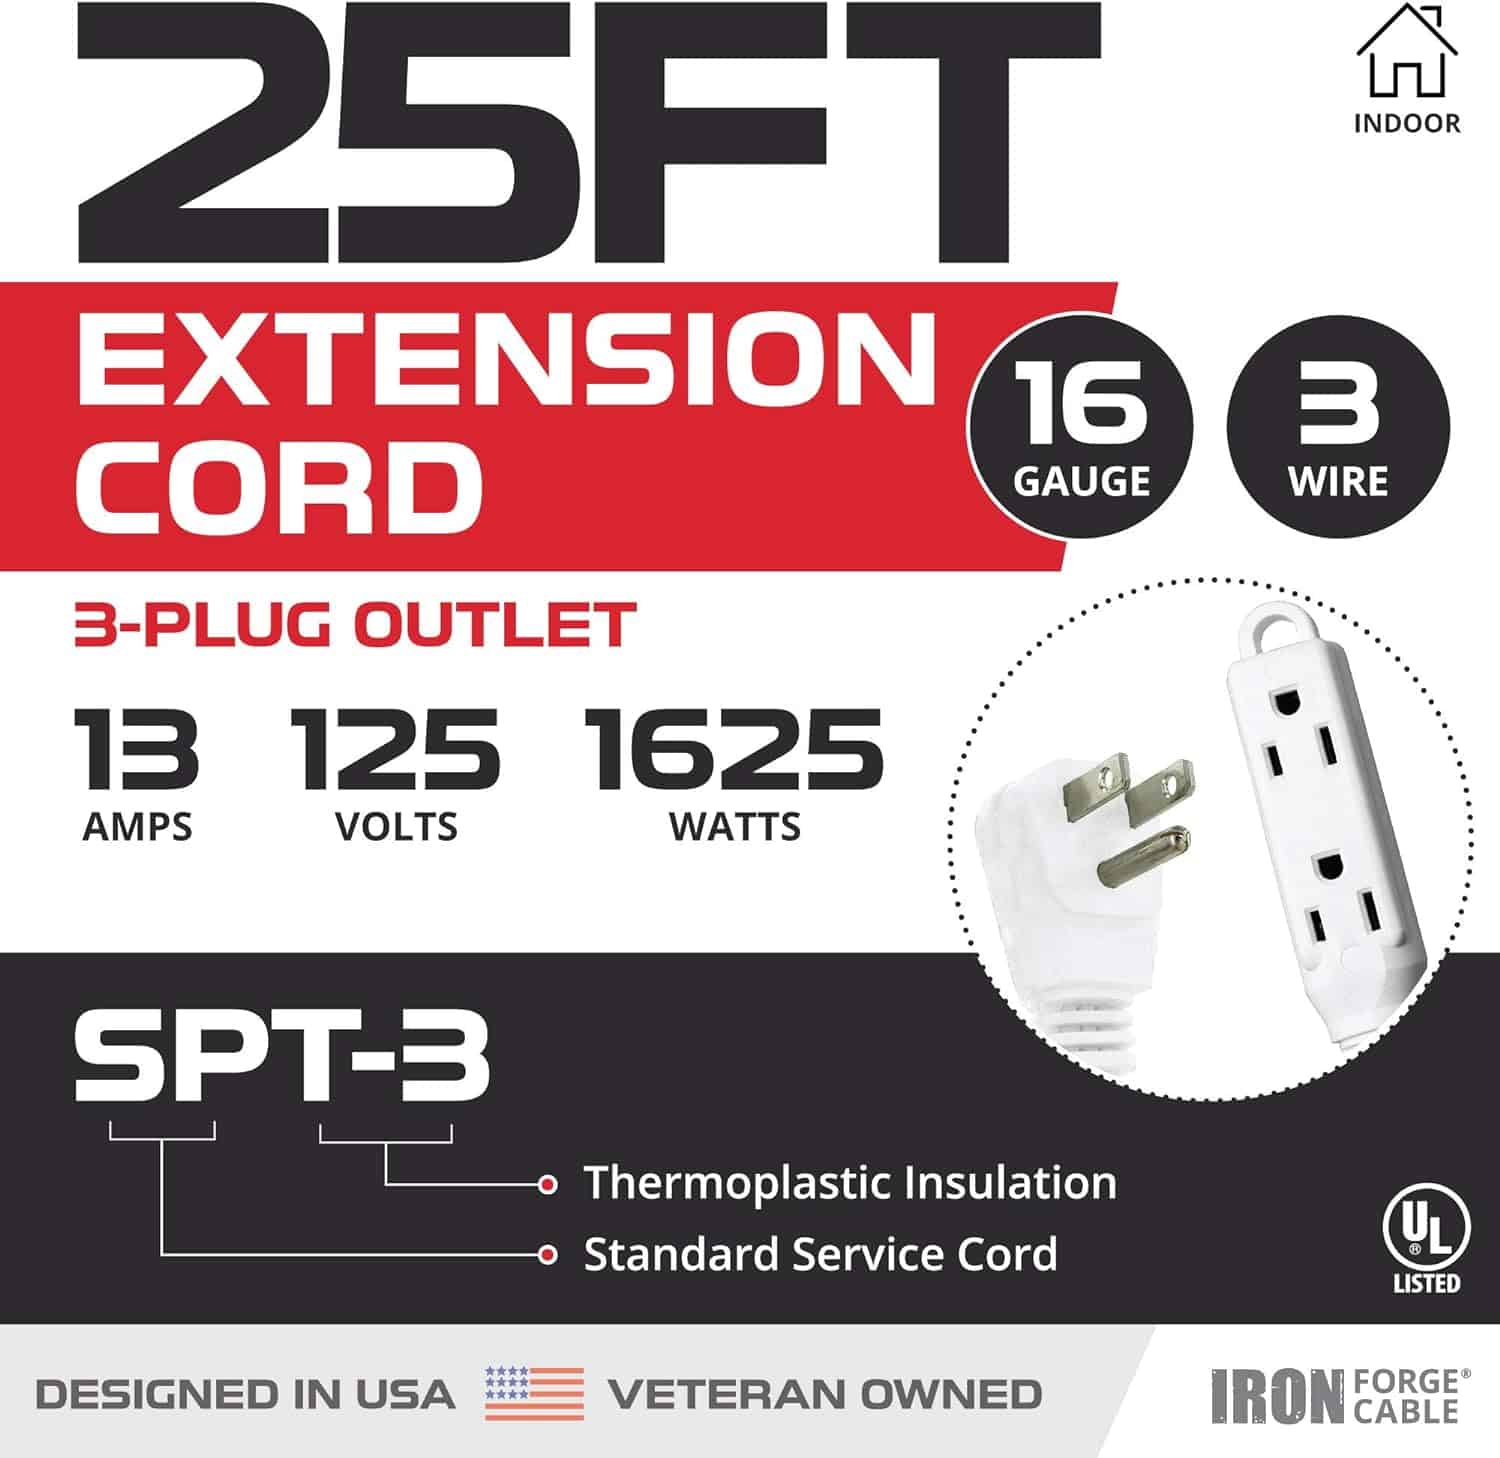 Iron Forge Cable Flat Plug White Extension Cord with 3 Outlets 25 Ft,16 3 Heavy Duty 3 Prong Extension Cord with Multiple Outlets, Power Outlet for Home, Garage Workshop 16 AWG Indoor Extension Cord 2